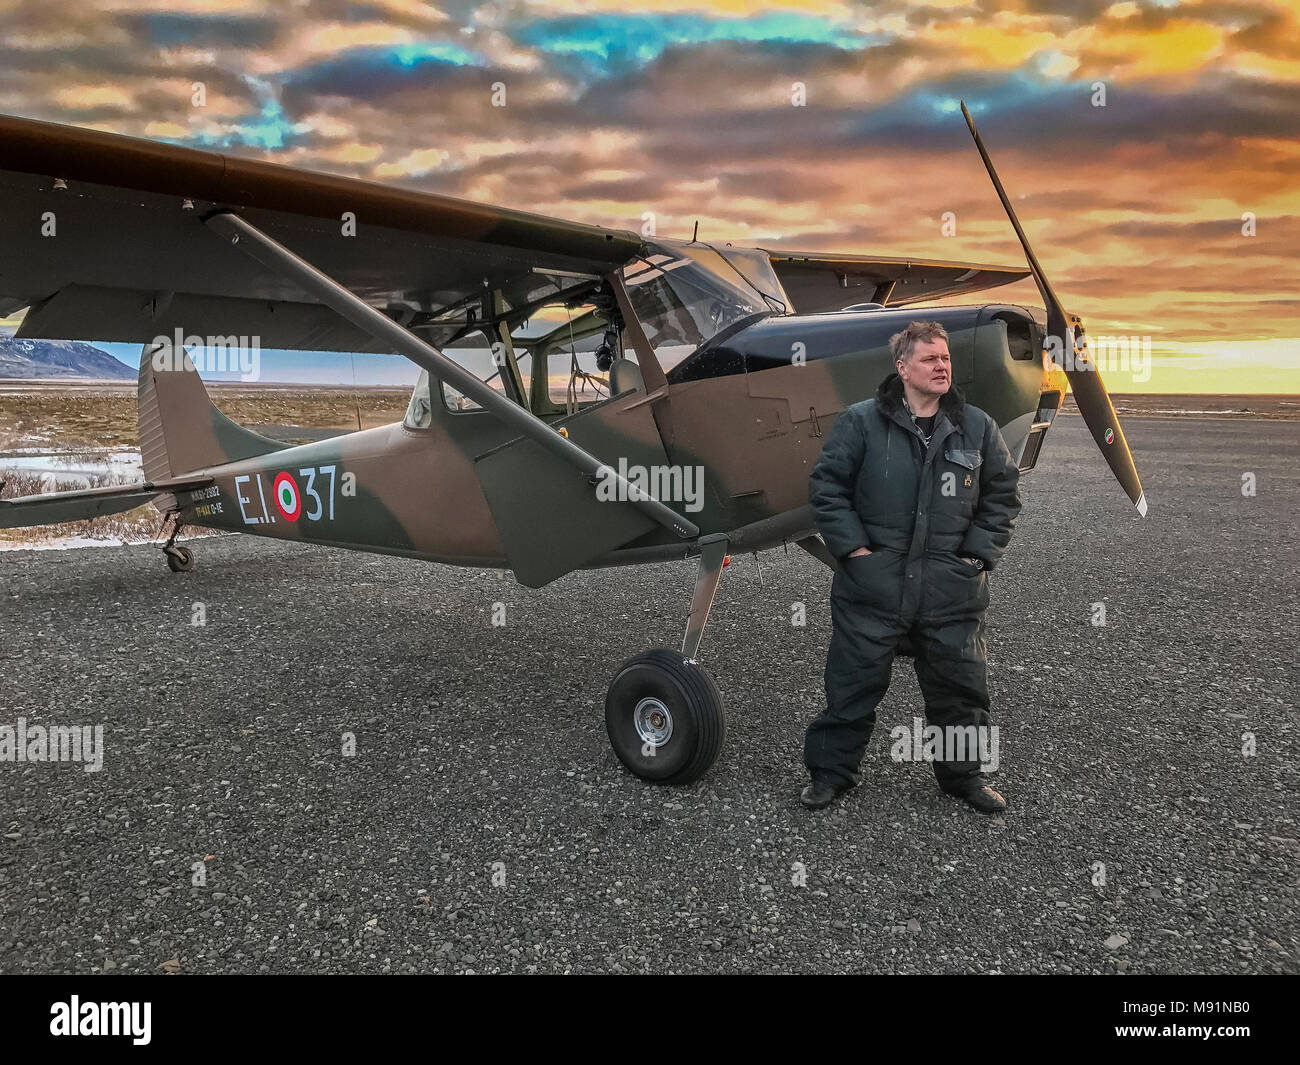 Pilot and Cessna Airplane, Iceland. Stock Photo